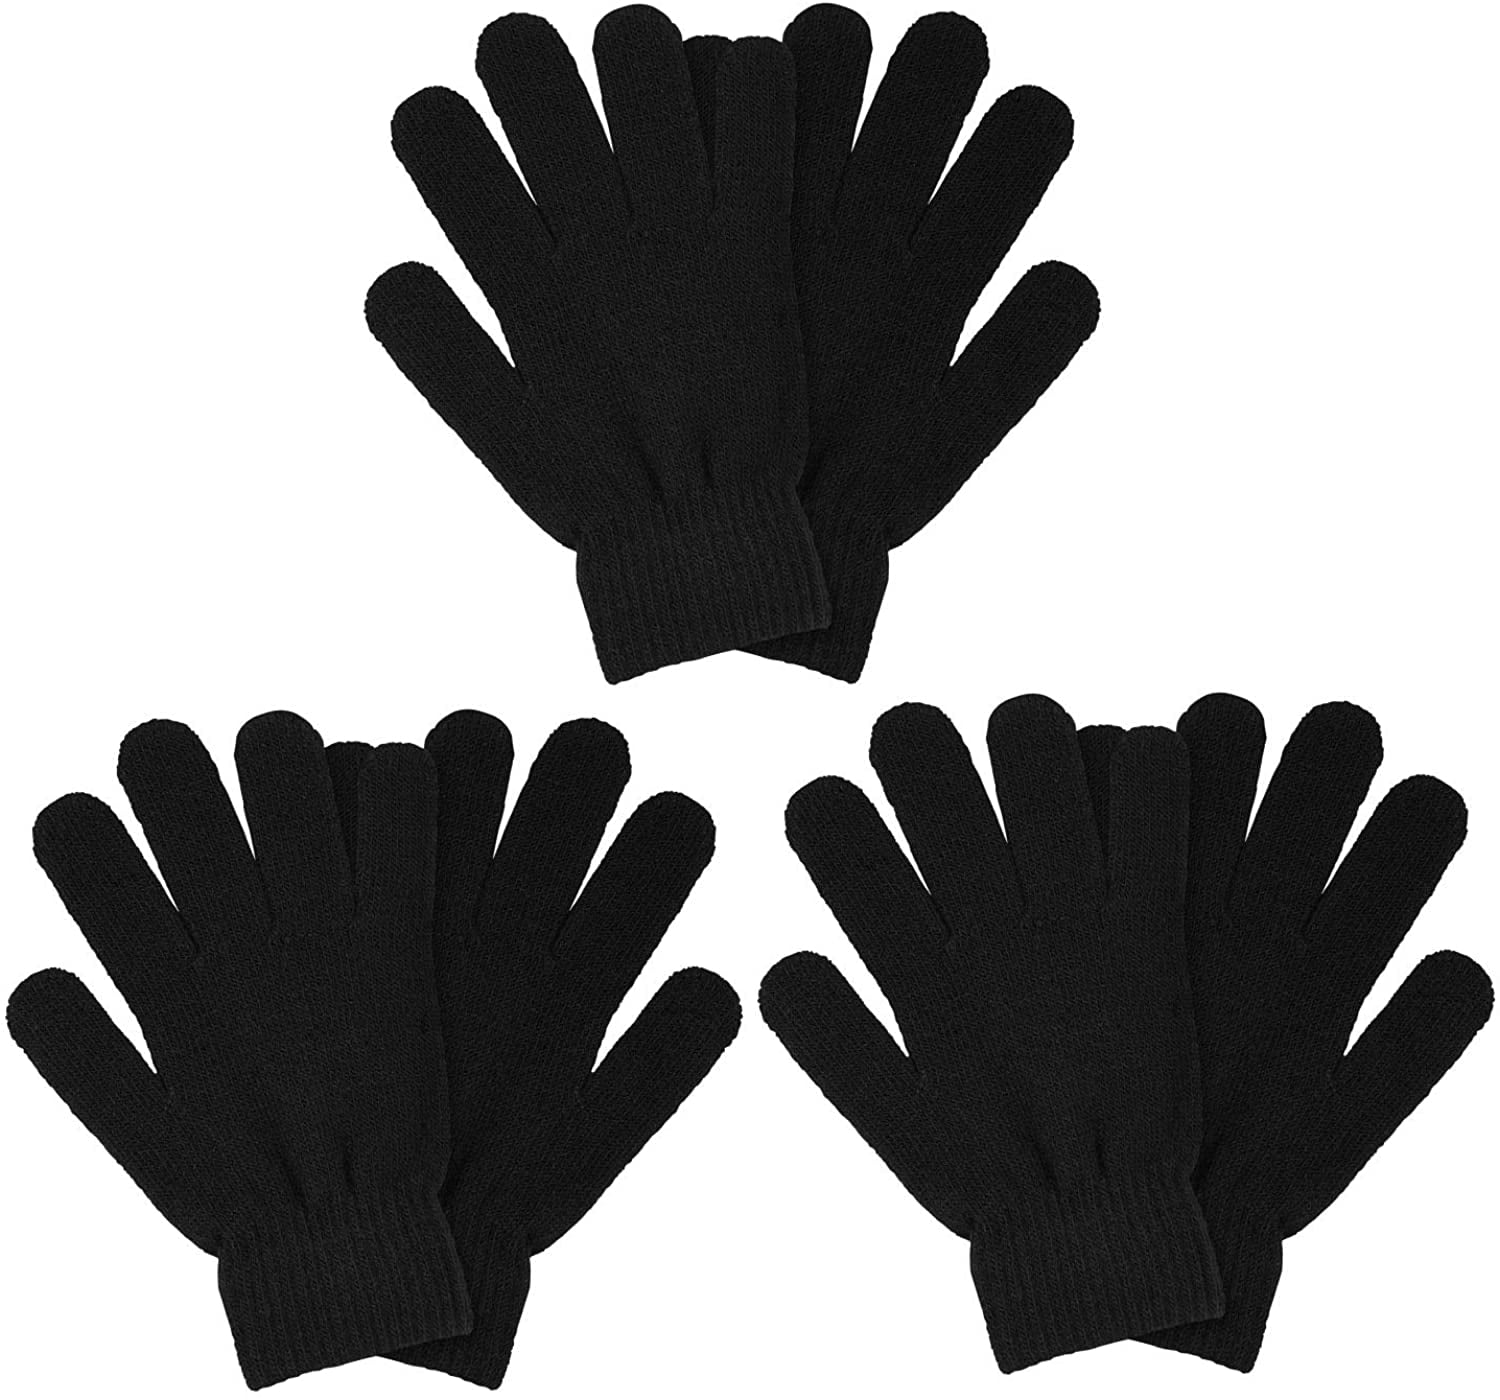 Mens Magic Gloves Winter ADULTS Ladies Soft Womens Stretch Black One Size Warm